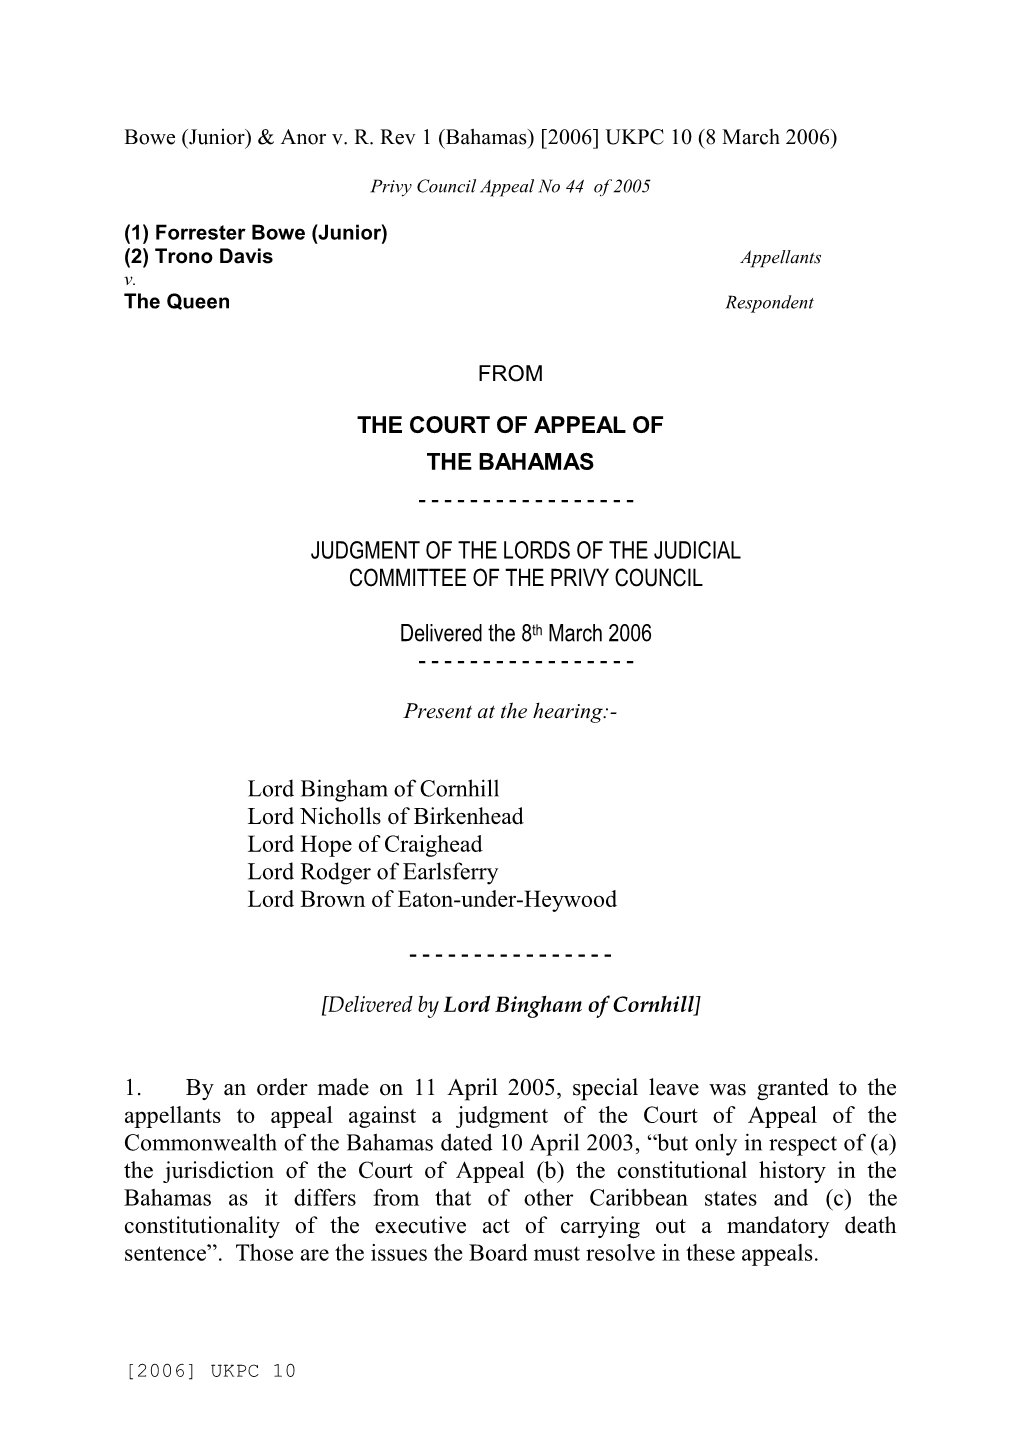 JUDGMENT of the LORDS of the JUDICIAL COMMITTEE of the PRIVY COUNCIL Delivered the 8Th March 2006 Lord Bingham of Cornhill Lord